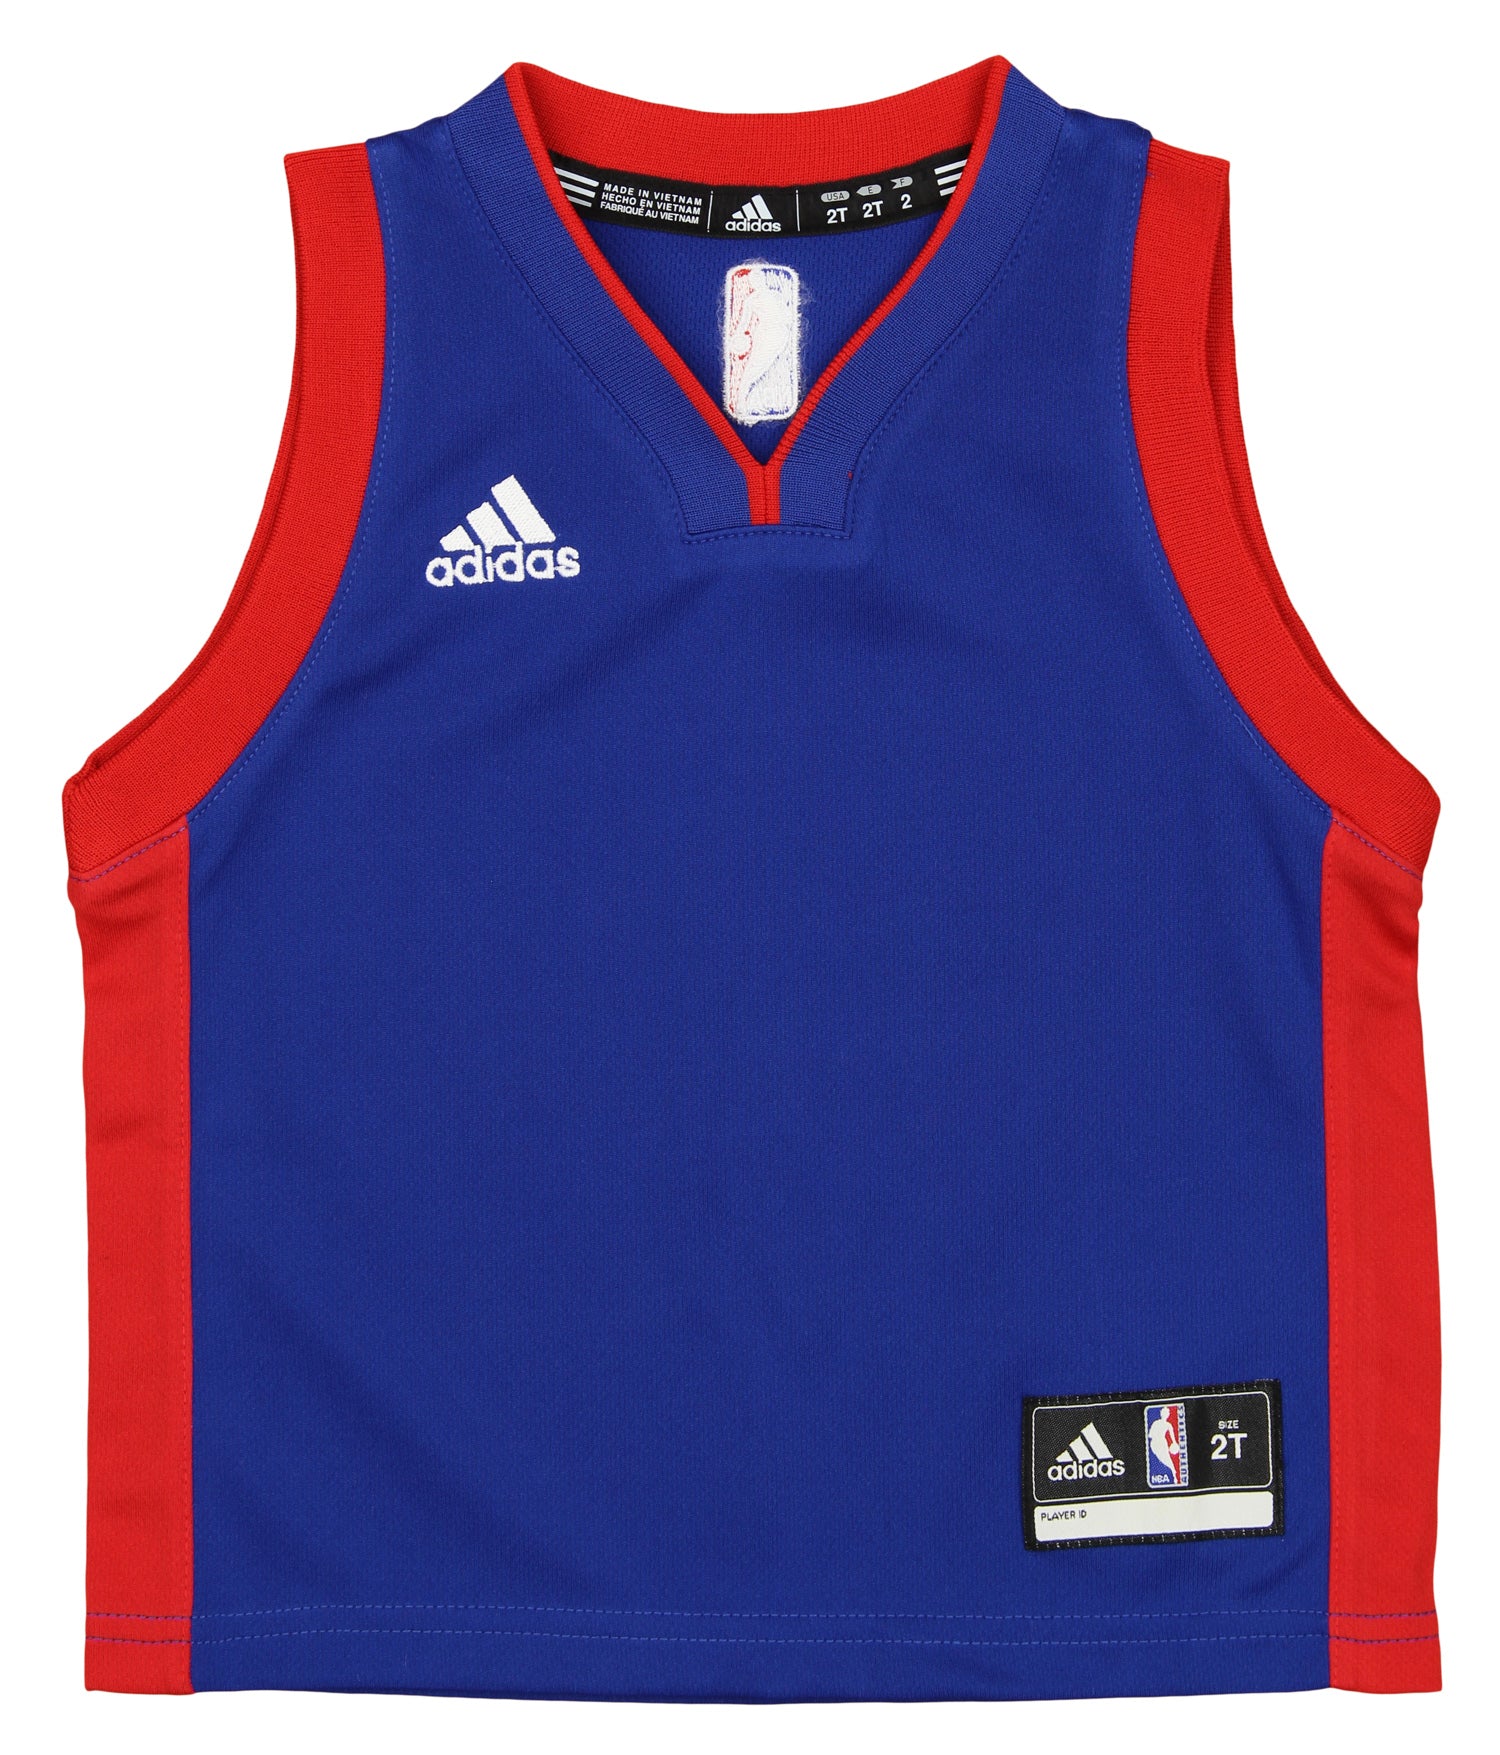 adidas NBA Mens Replica Player Home Jersey in 2023